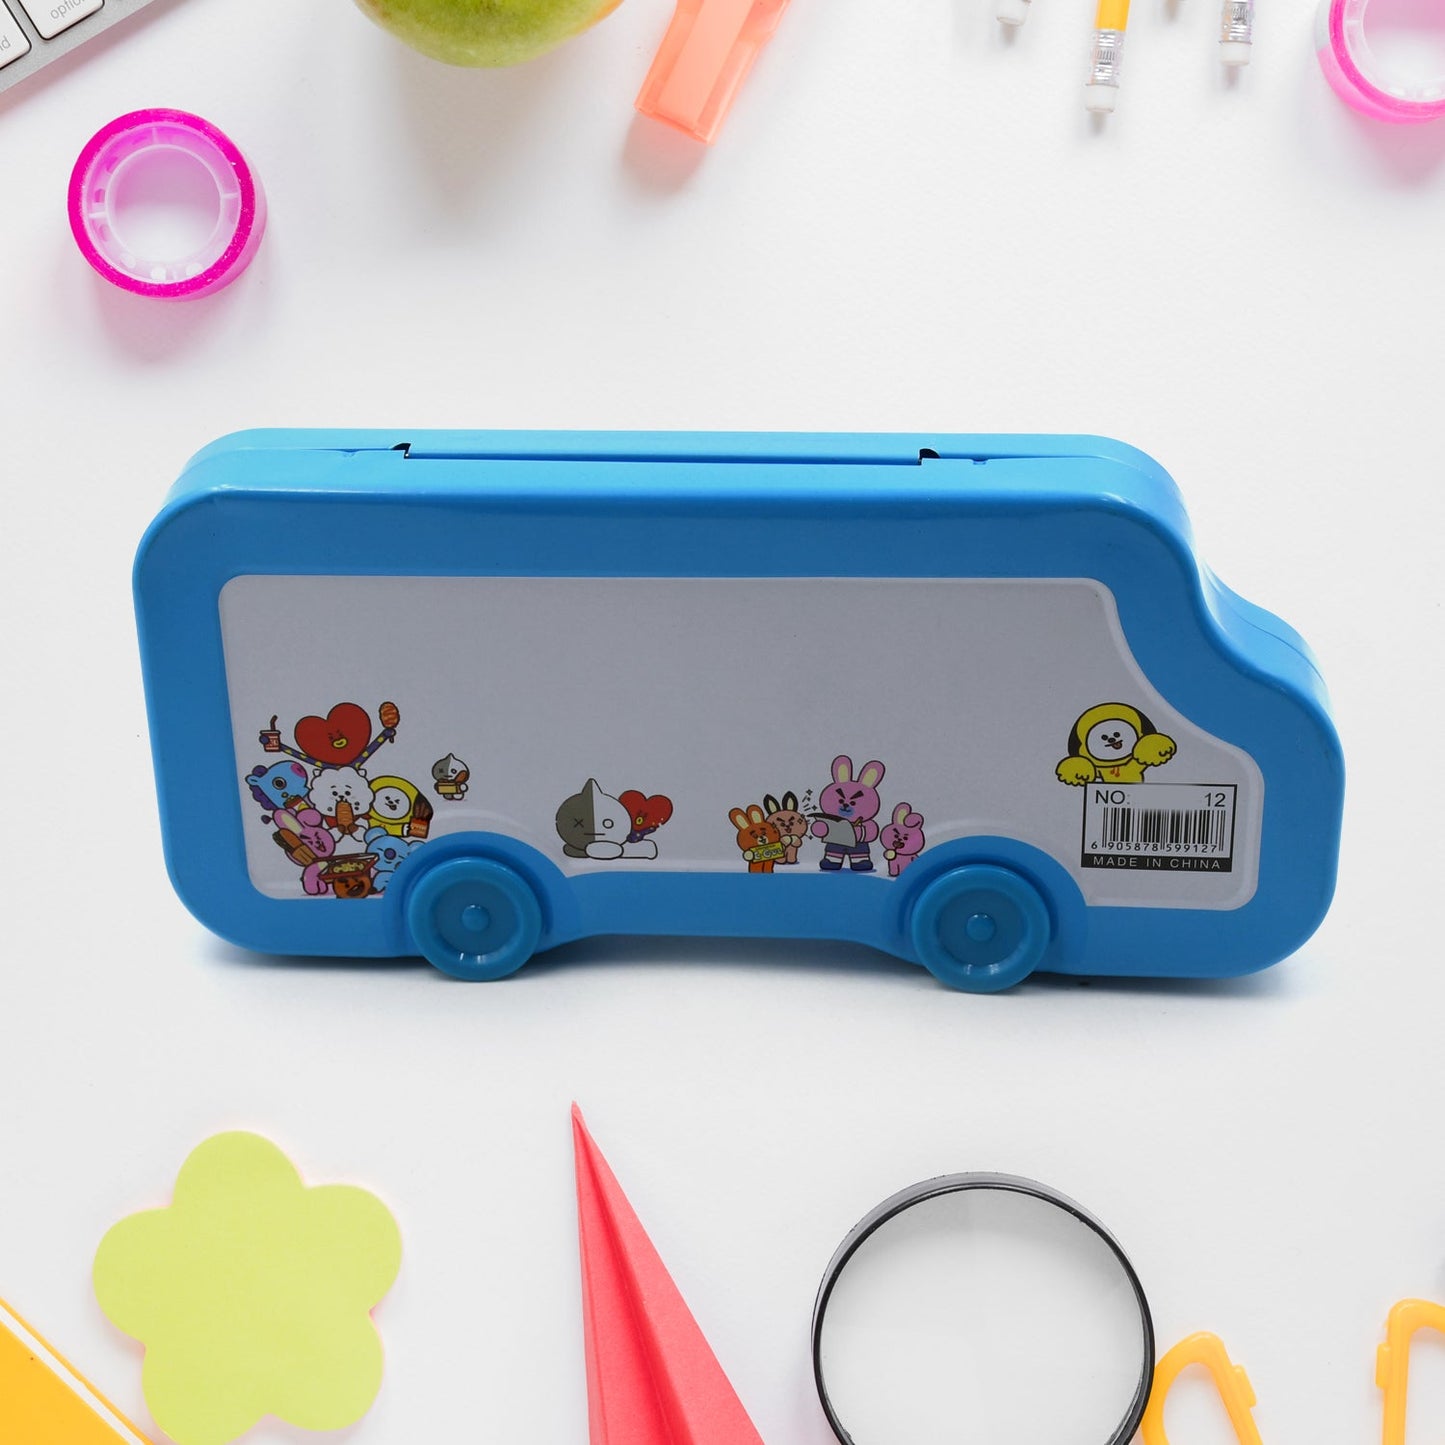 Bus Shape Compass Box for Boys, Kids School Accessories |  Pencil Box  with Wheels for Girls and Kids, String Operated Case Students School Supplies - Stationery Set Organizer Birthday Return Gift for Kids